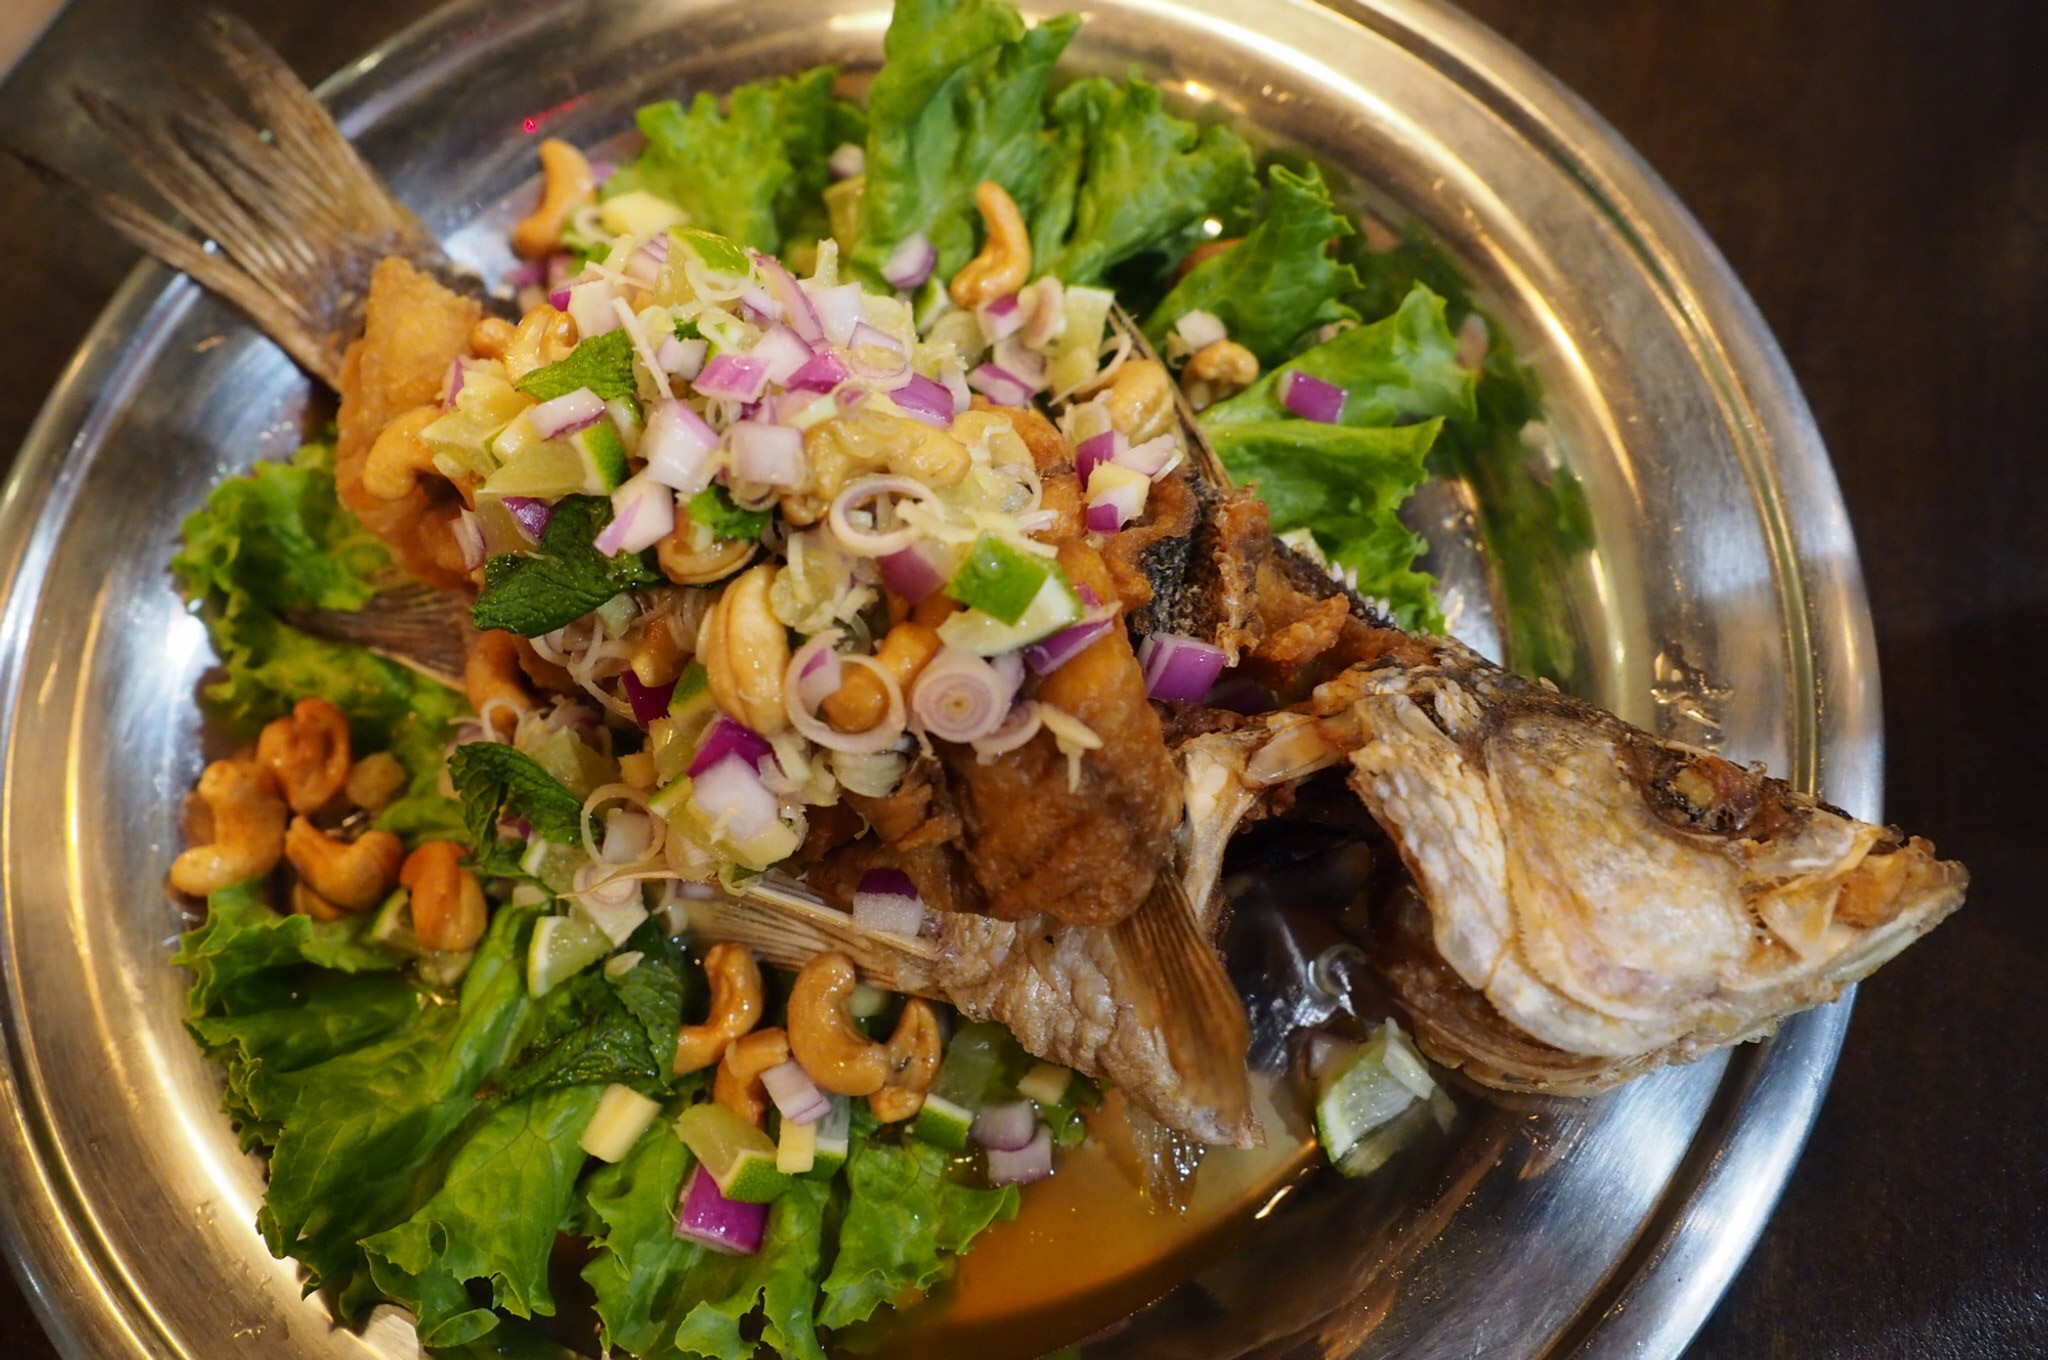 Grilled fish served with lettuce, cashews, red onions, and cilantro.